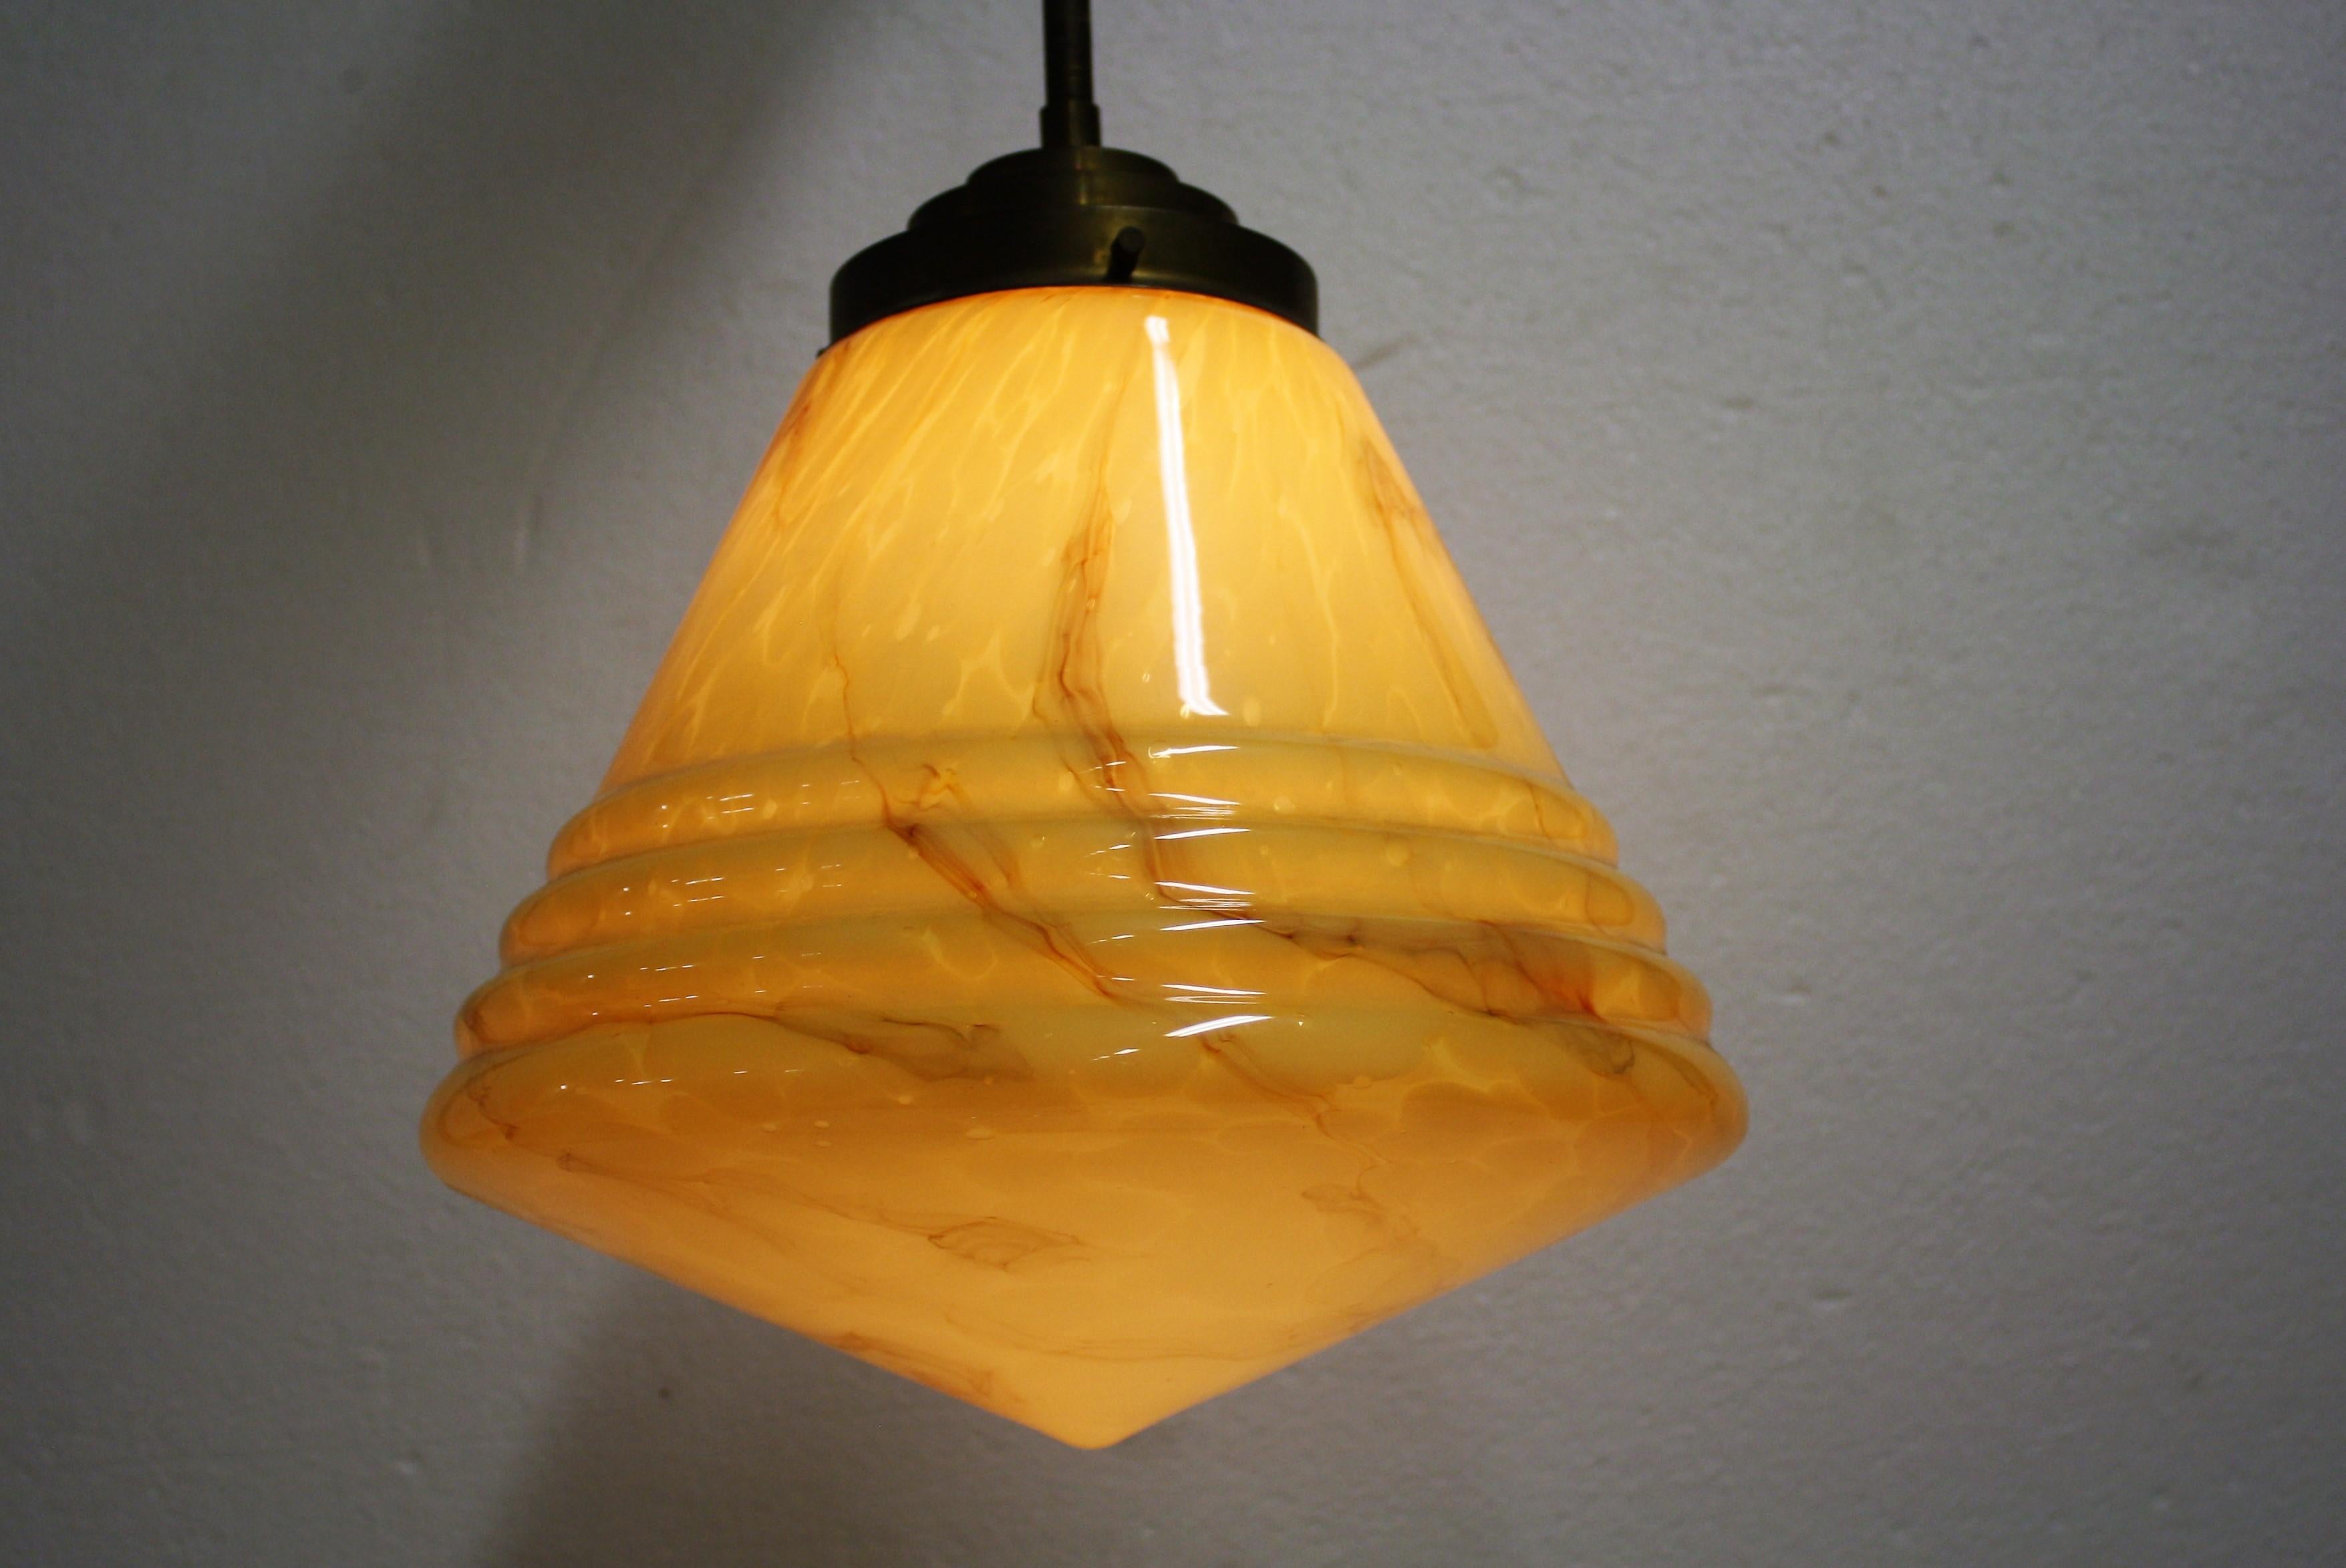 Antique conical shaped marbled glass pendant light.

The lamp is suspended by the original stepped copper shade holder. 

This type of lamp used to be installed in public spaces such as schools, offices, from the 1930s to the 1960s. 

The lamp